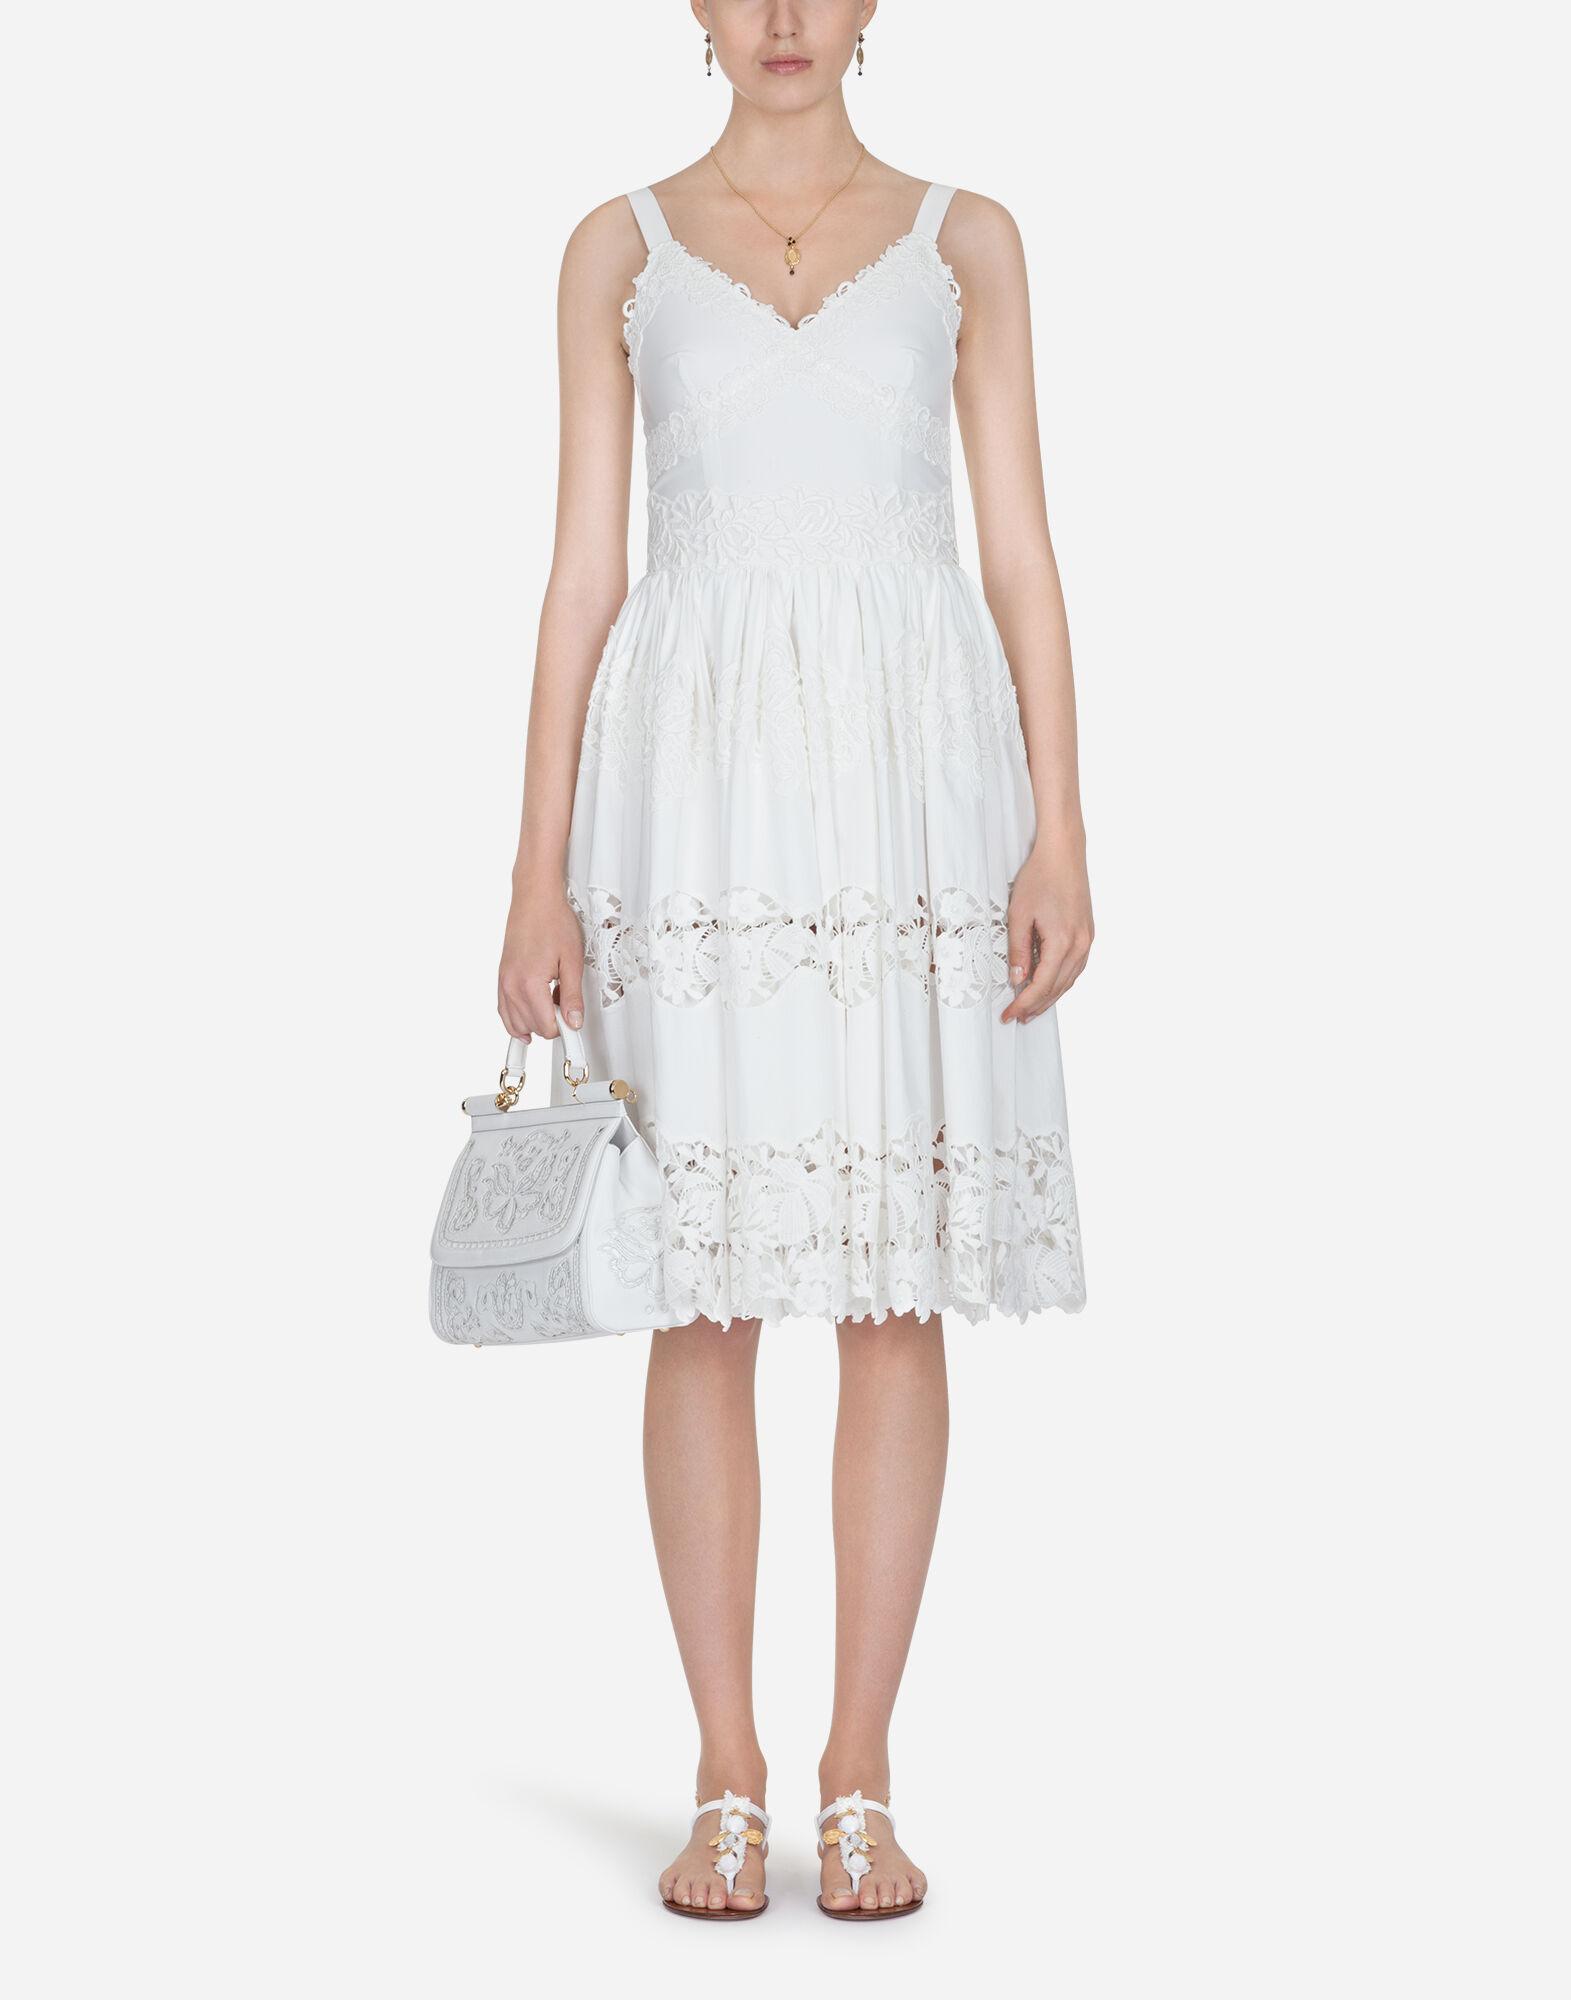 Dolce & Gabbana Lace Cotton Dress in White - Lyst